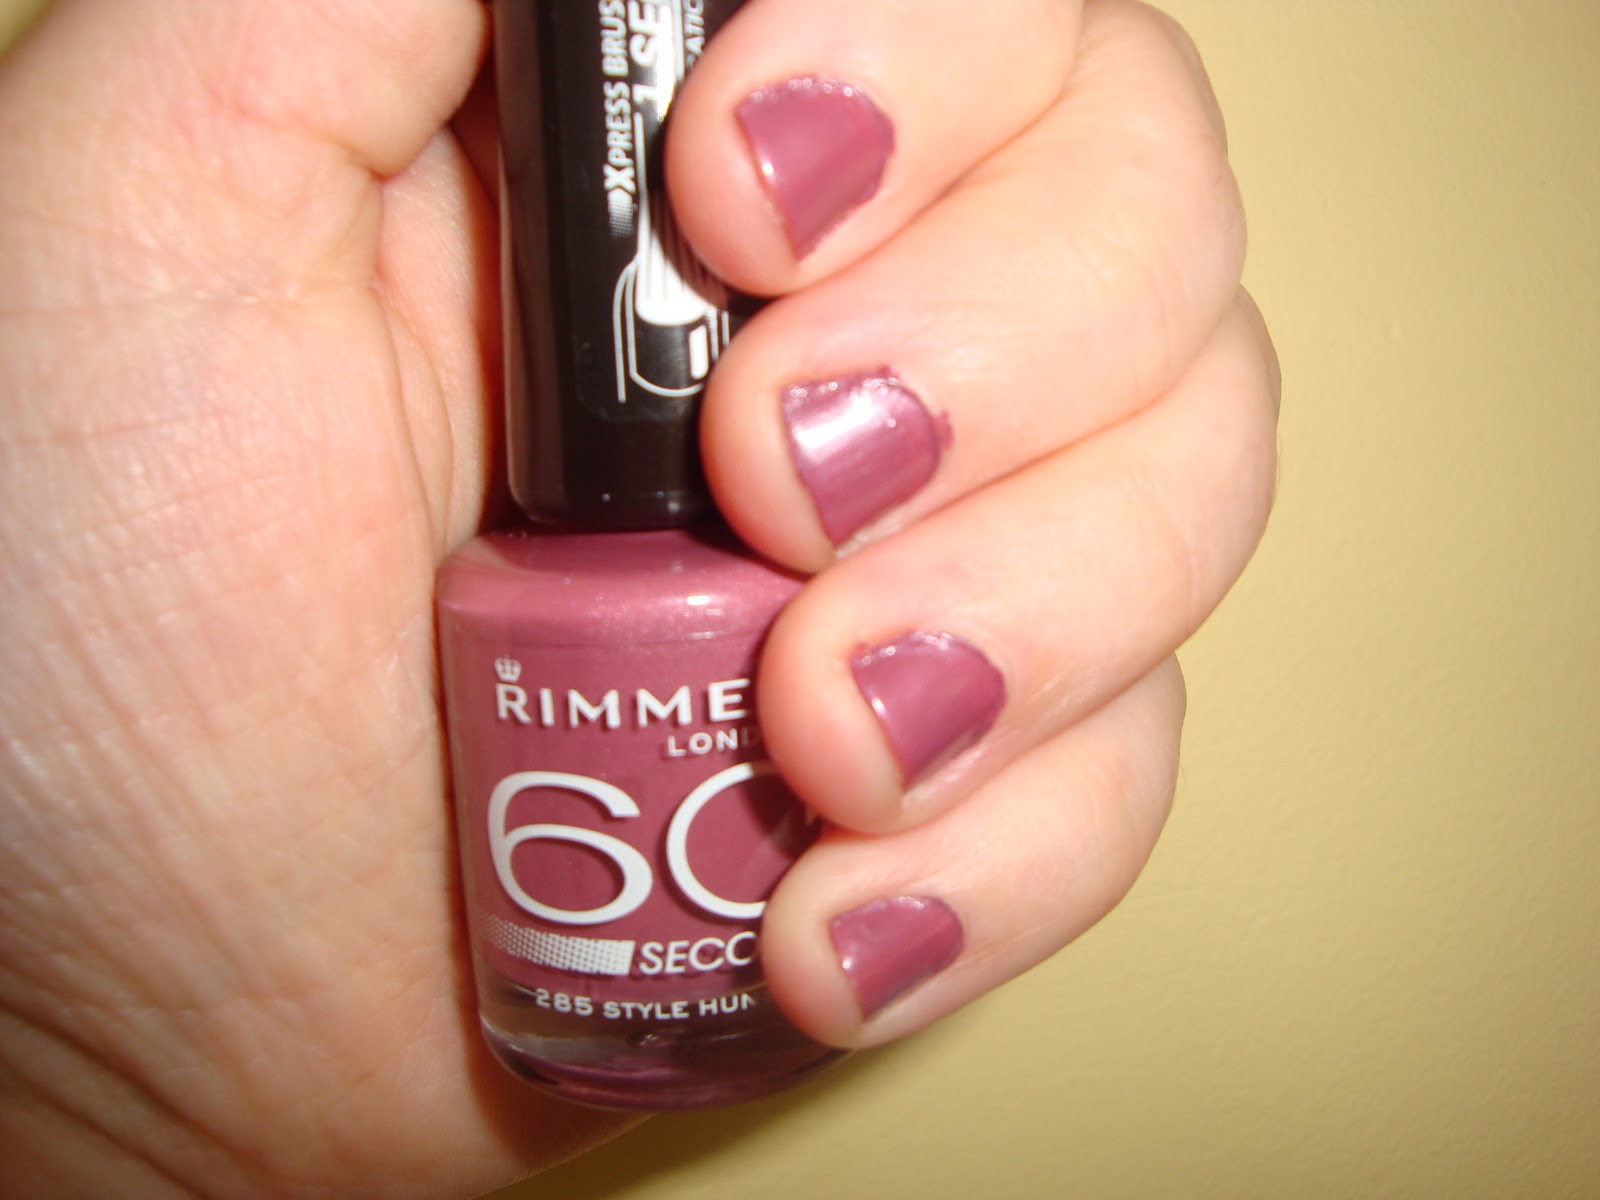 This week I have used the Rimmel London 60 seconds nailpolish in 235 Style